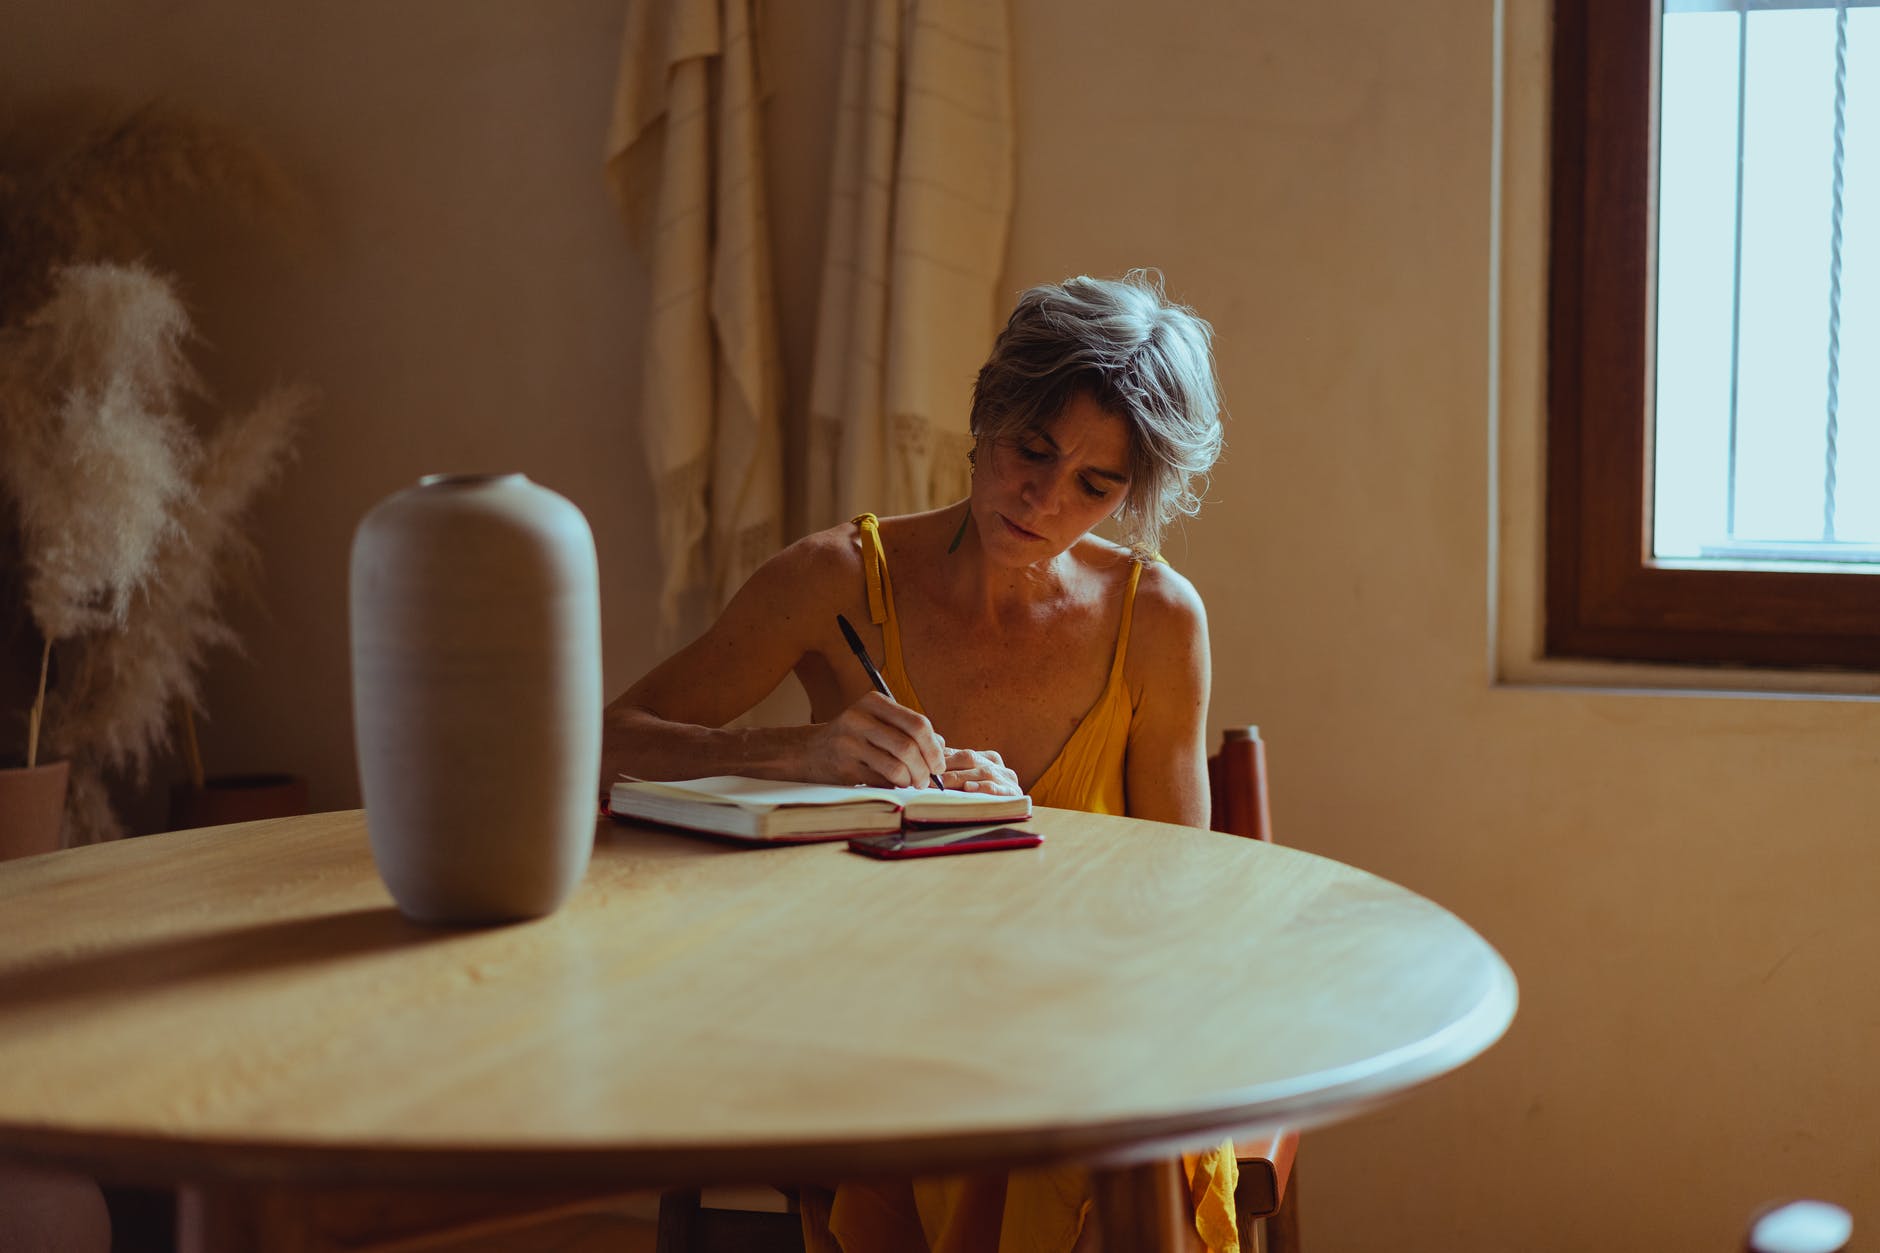 The grandmother writing her will | Photo: Pexels